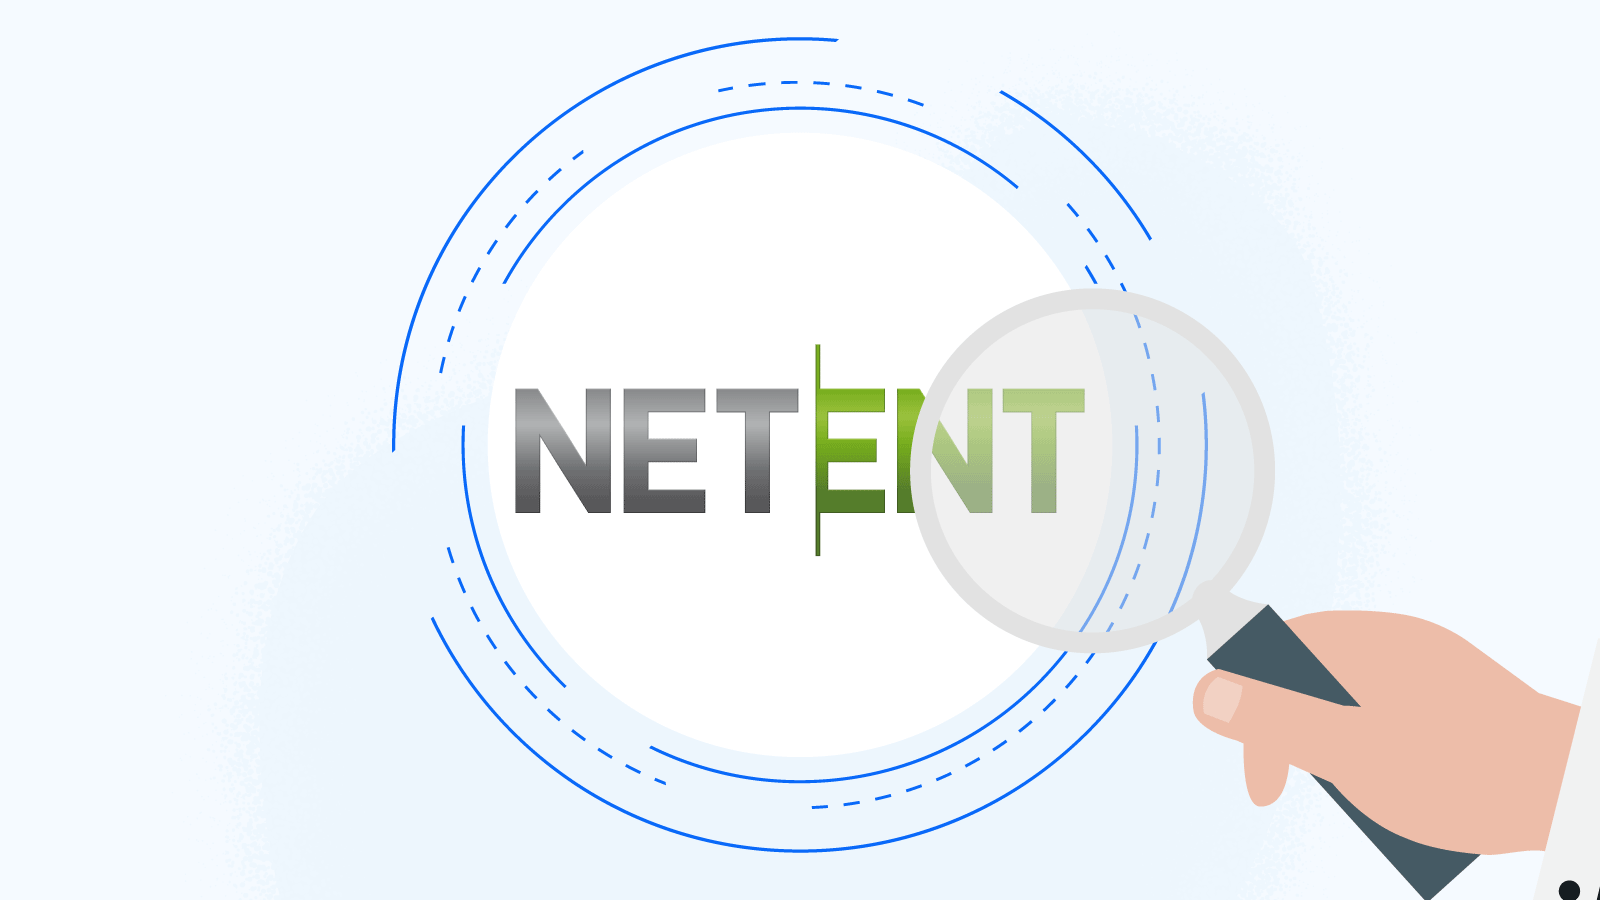 A note on NetEnt